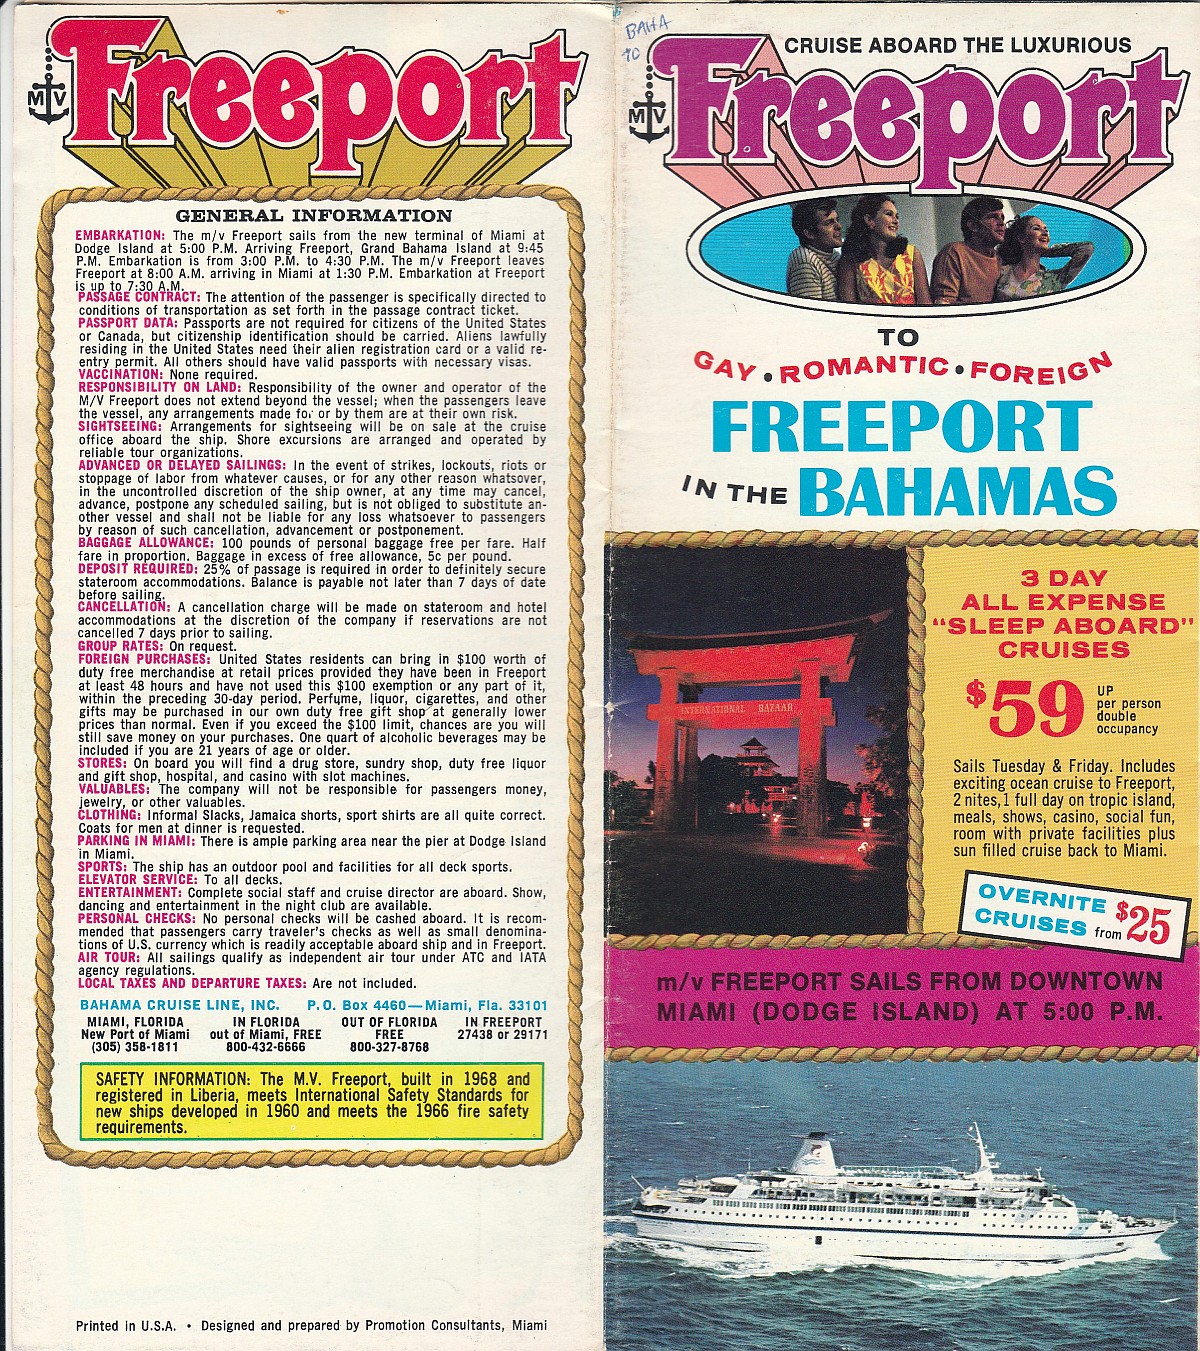 mv Freeport effective 1970: Front cover and general information